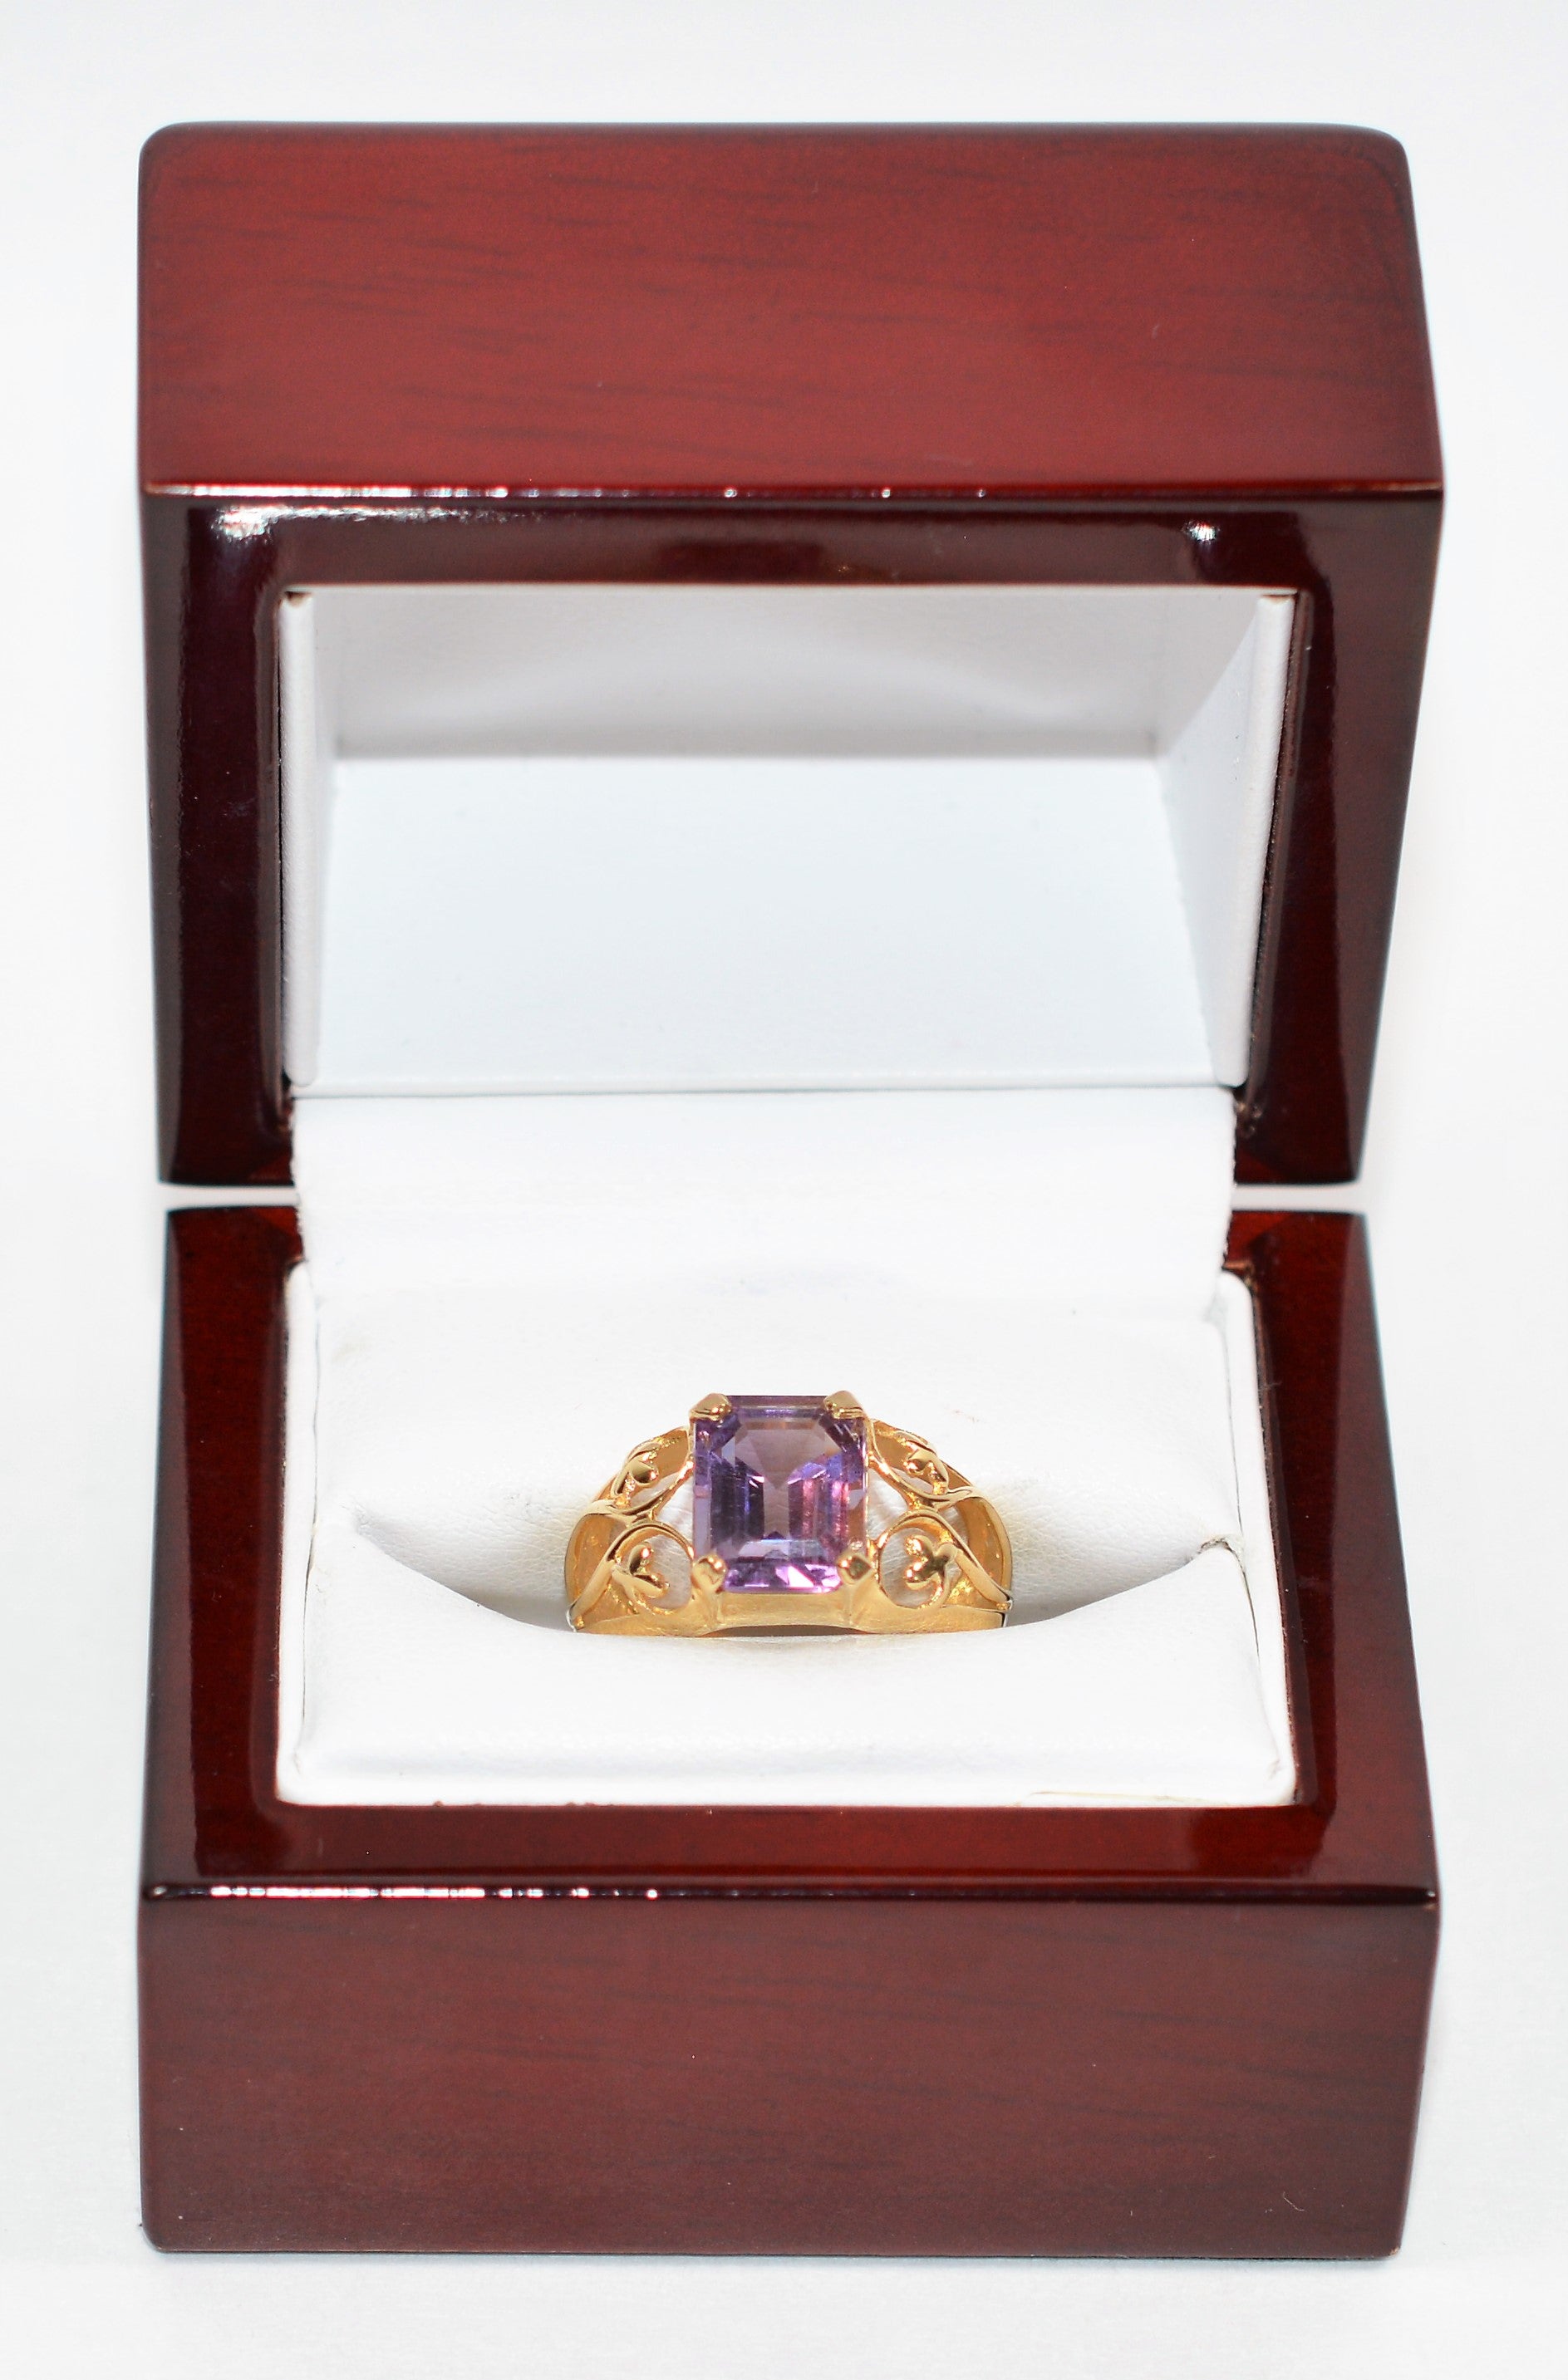 Natural Amethyst Ring 14K Solid Gold 3.50ct Solitaire Ring Birthstone Ring Purple Ring Cocktail Ring Ladies Ring Women's Ring Estate Jewelry